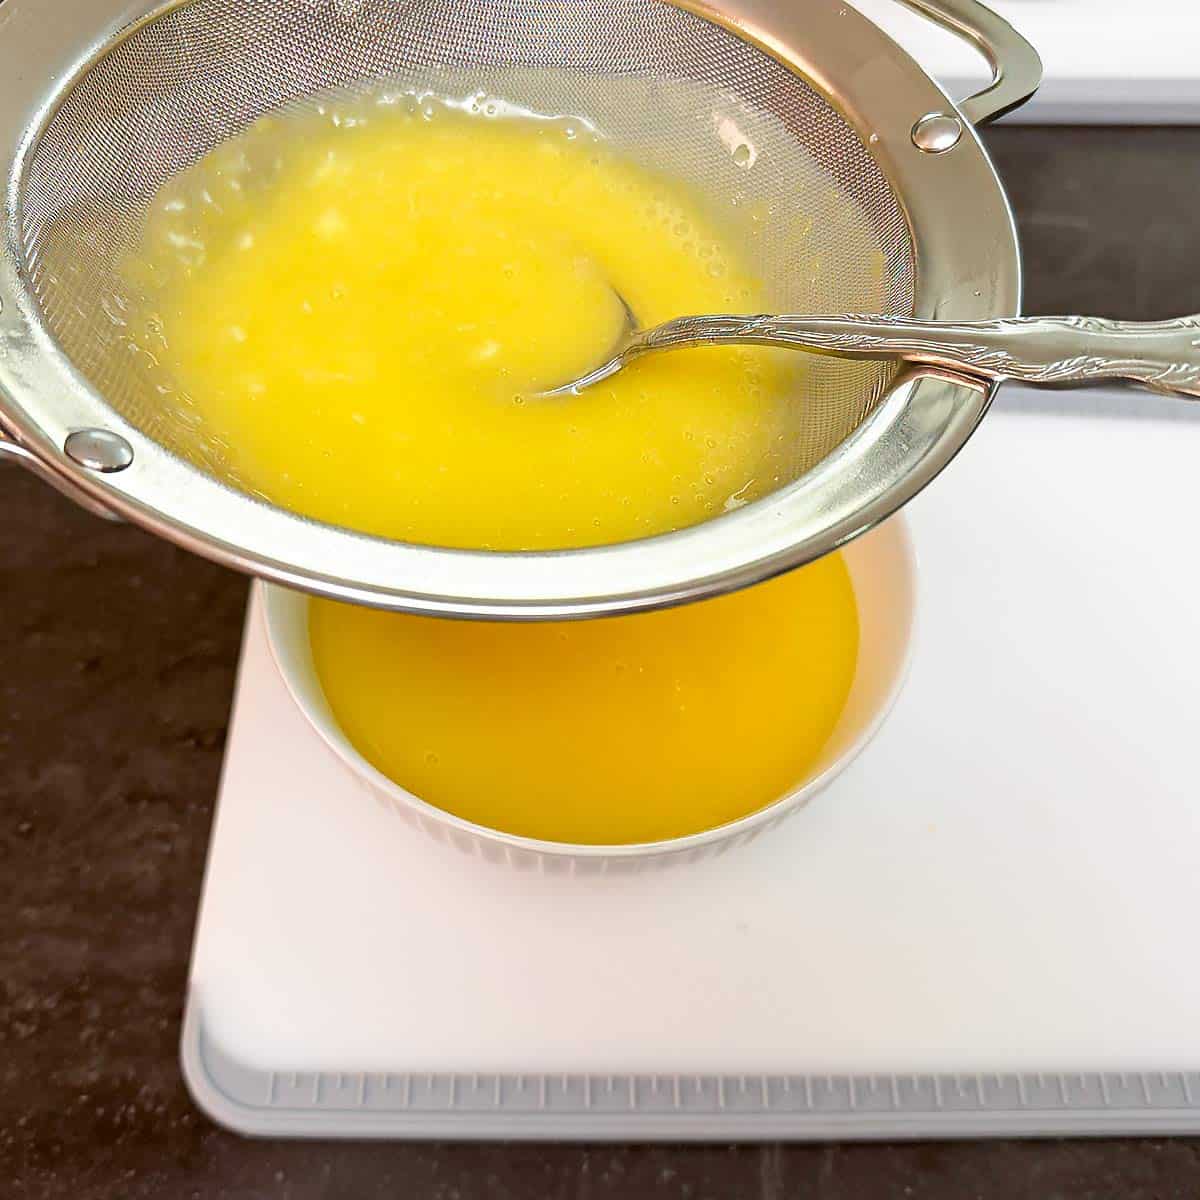 Strain the small pieces of egg out of the lemon curd.